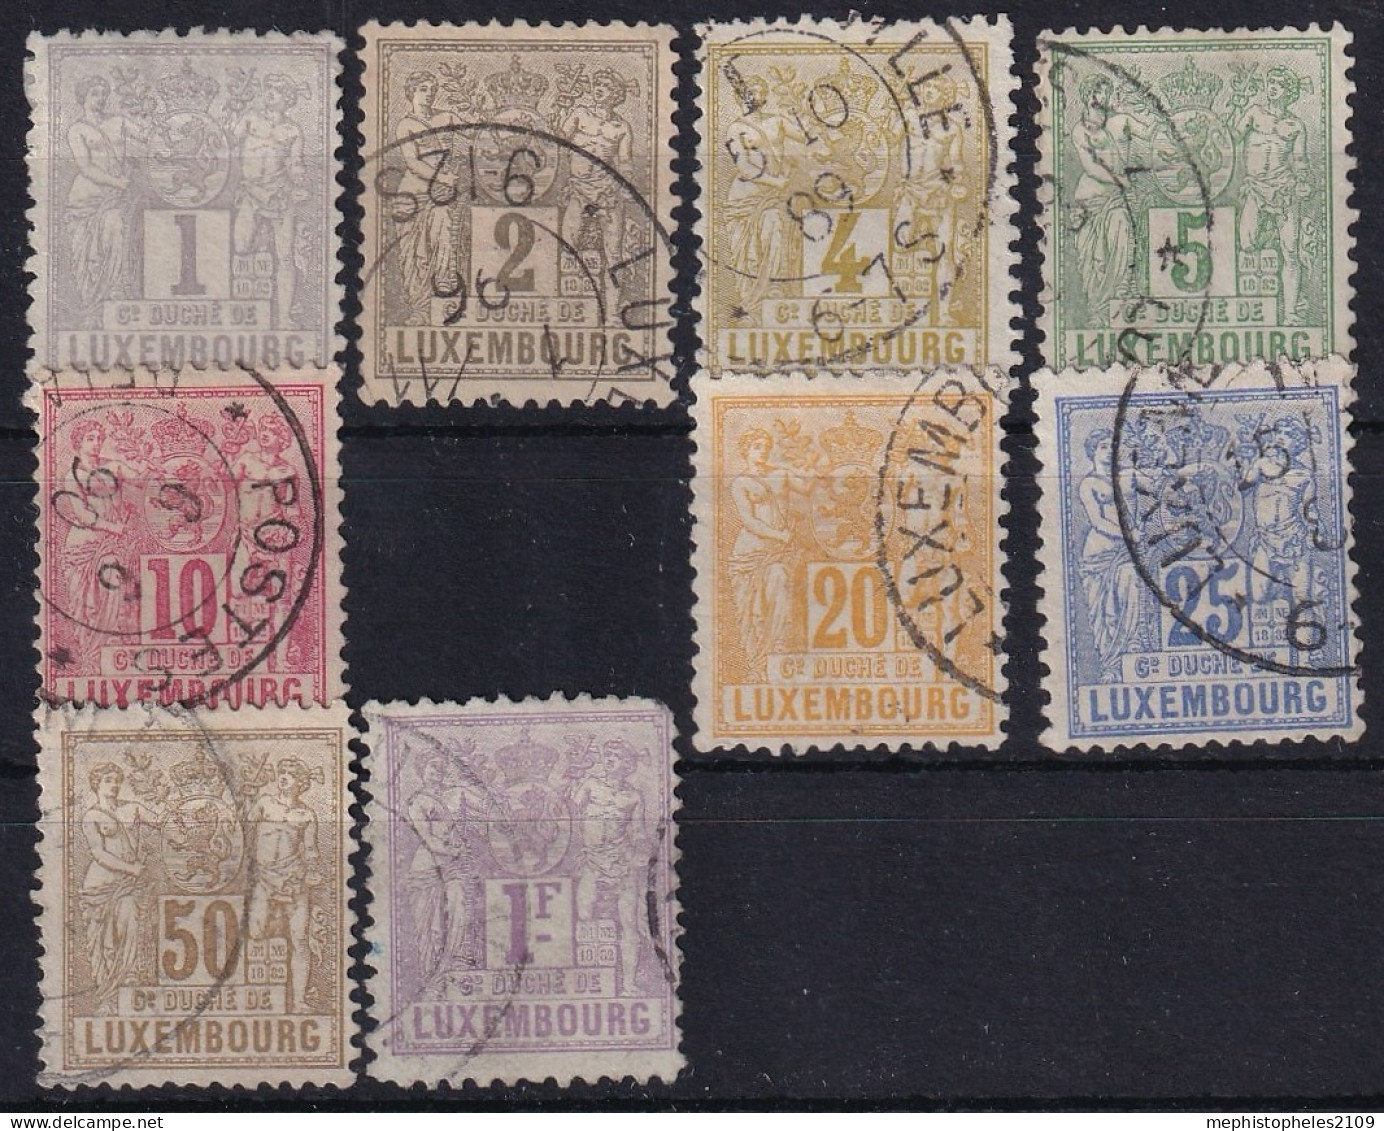 LUXEMBOURG 1882 - Canceled - Sc# 48-52, 54-58 - 1882 Allegorie